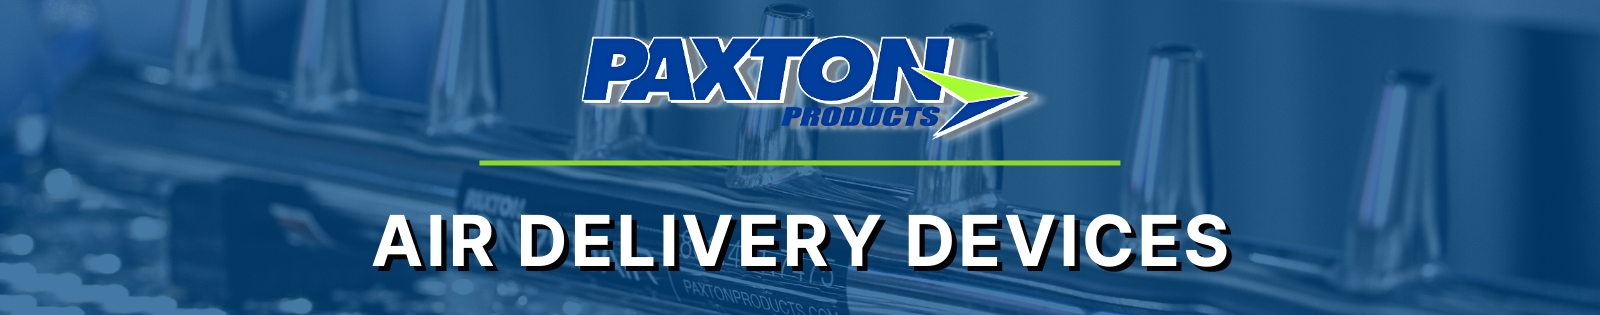 Paxton Products - High Efficiency Air Delivery Devices 